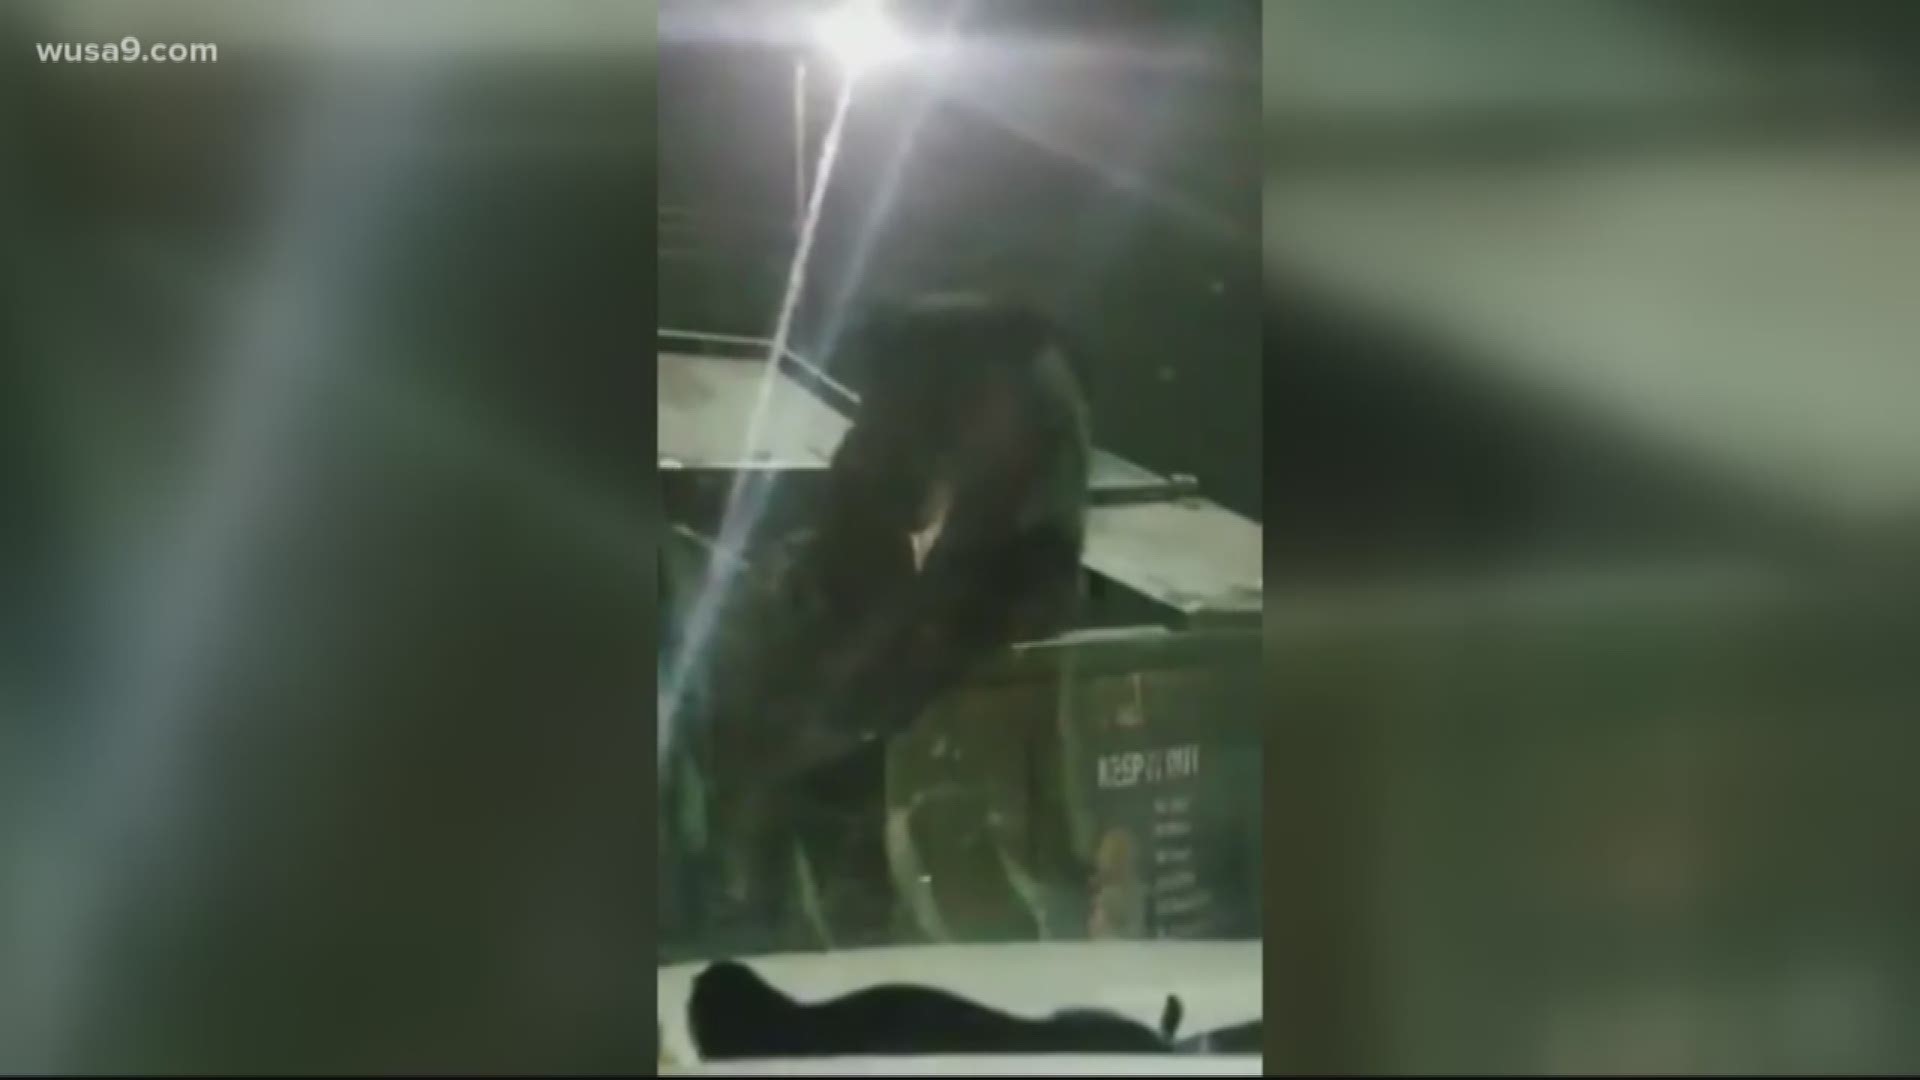 A huge bear was seen dumpster diving for snacks at a Tennessee gas station.